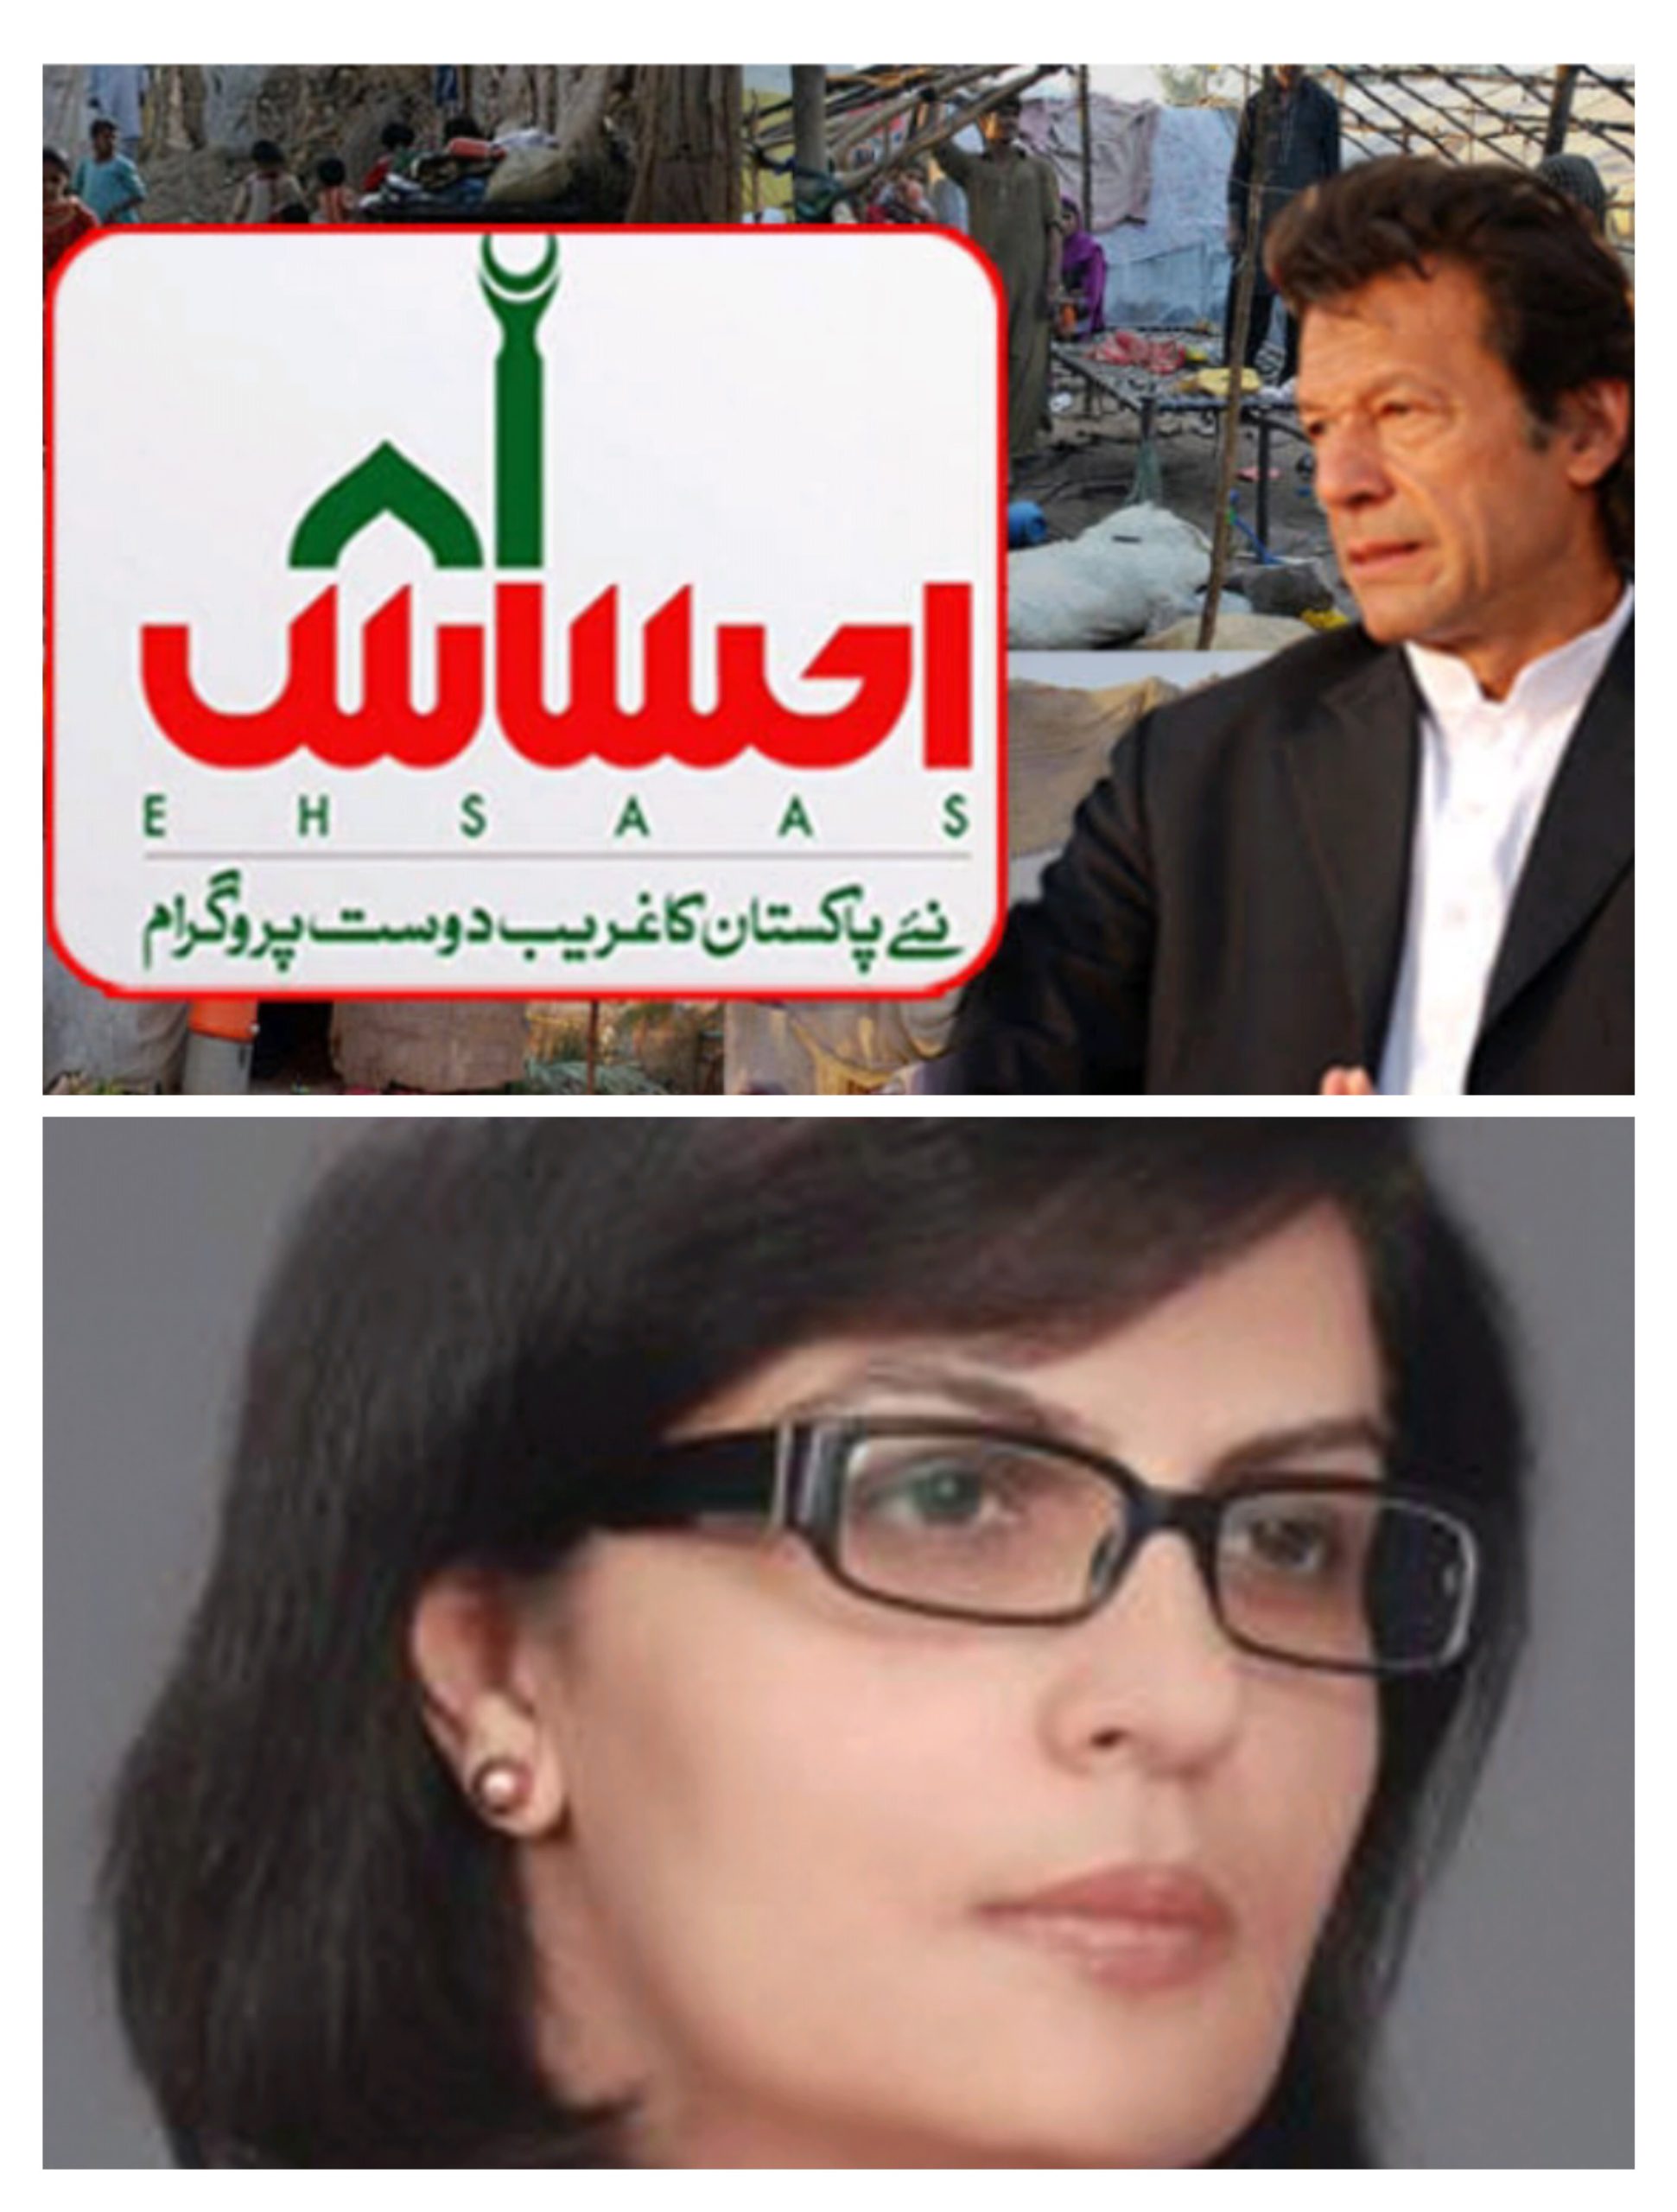 Chairperson Benazir Bhutto’s support program Sania Nishtar resigns.